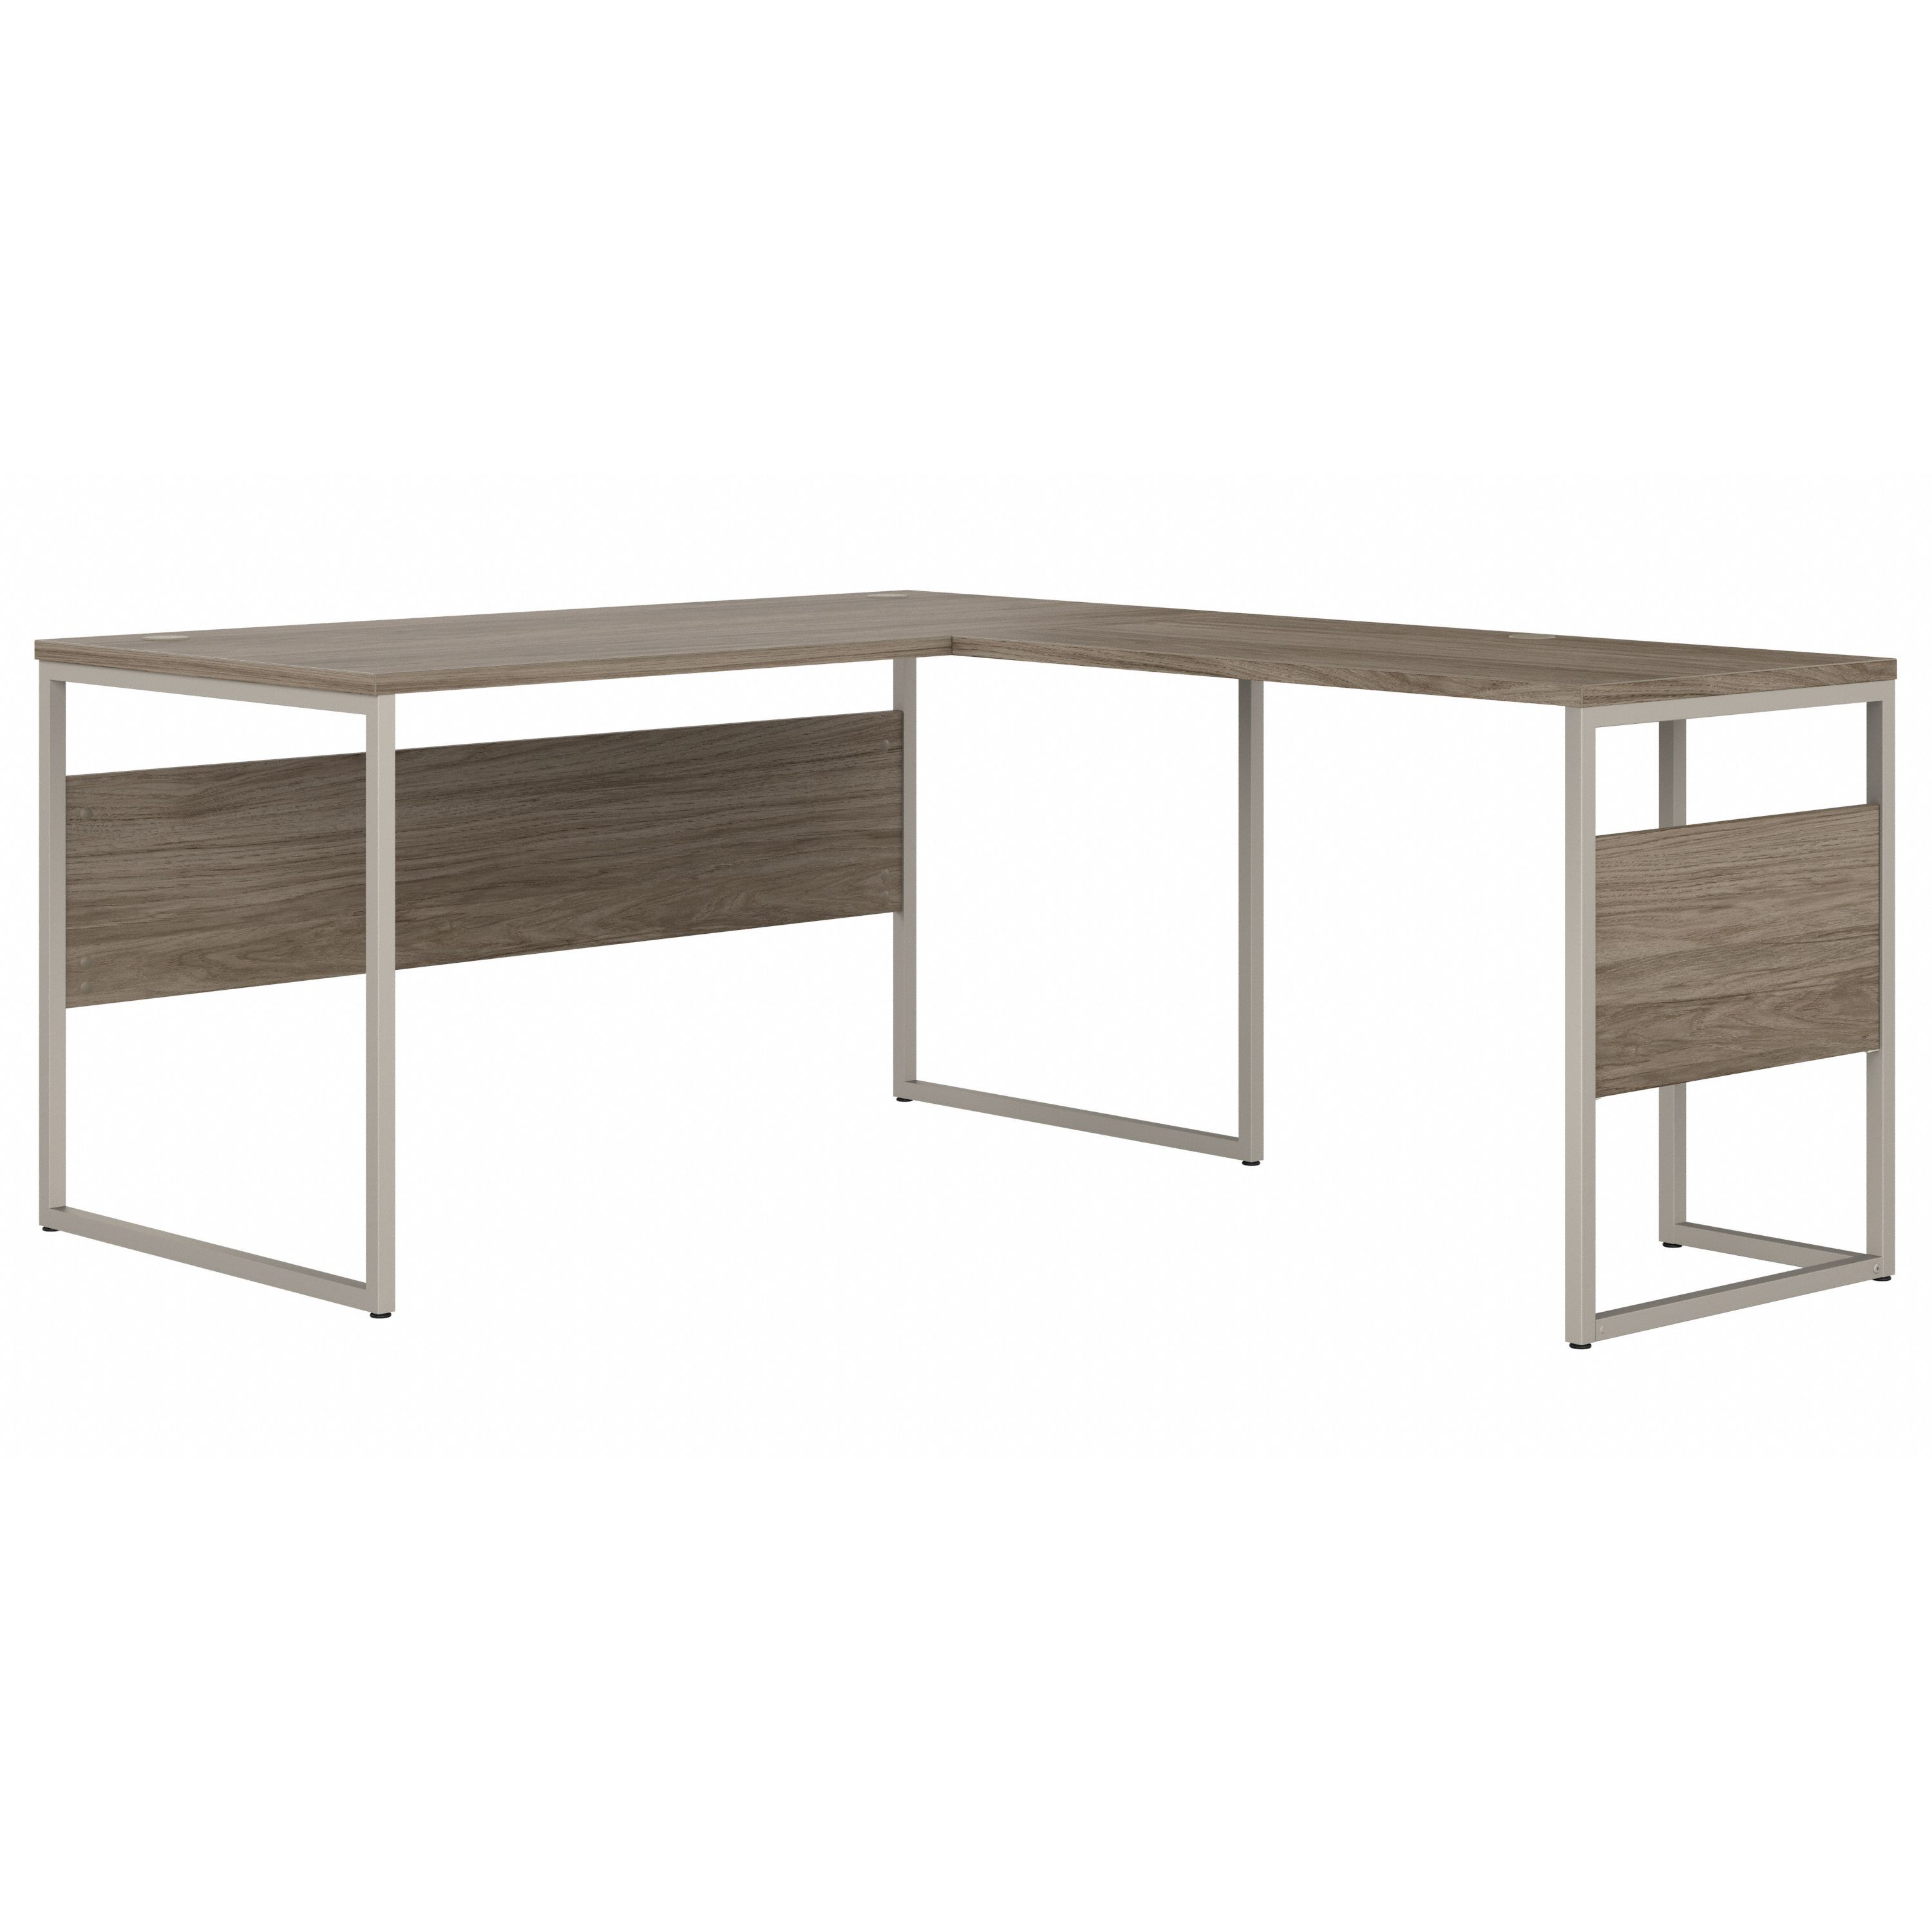 Shop Bush Business Furniture Hybrid 60W x 30D L Shaped Table Desk with Metal Legs 02 HYB027MH #color_modern hickory